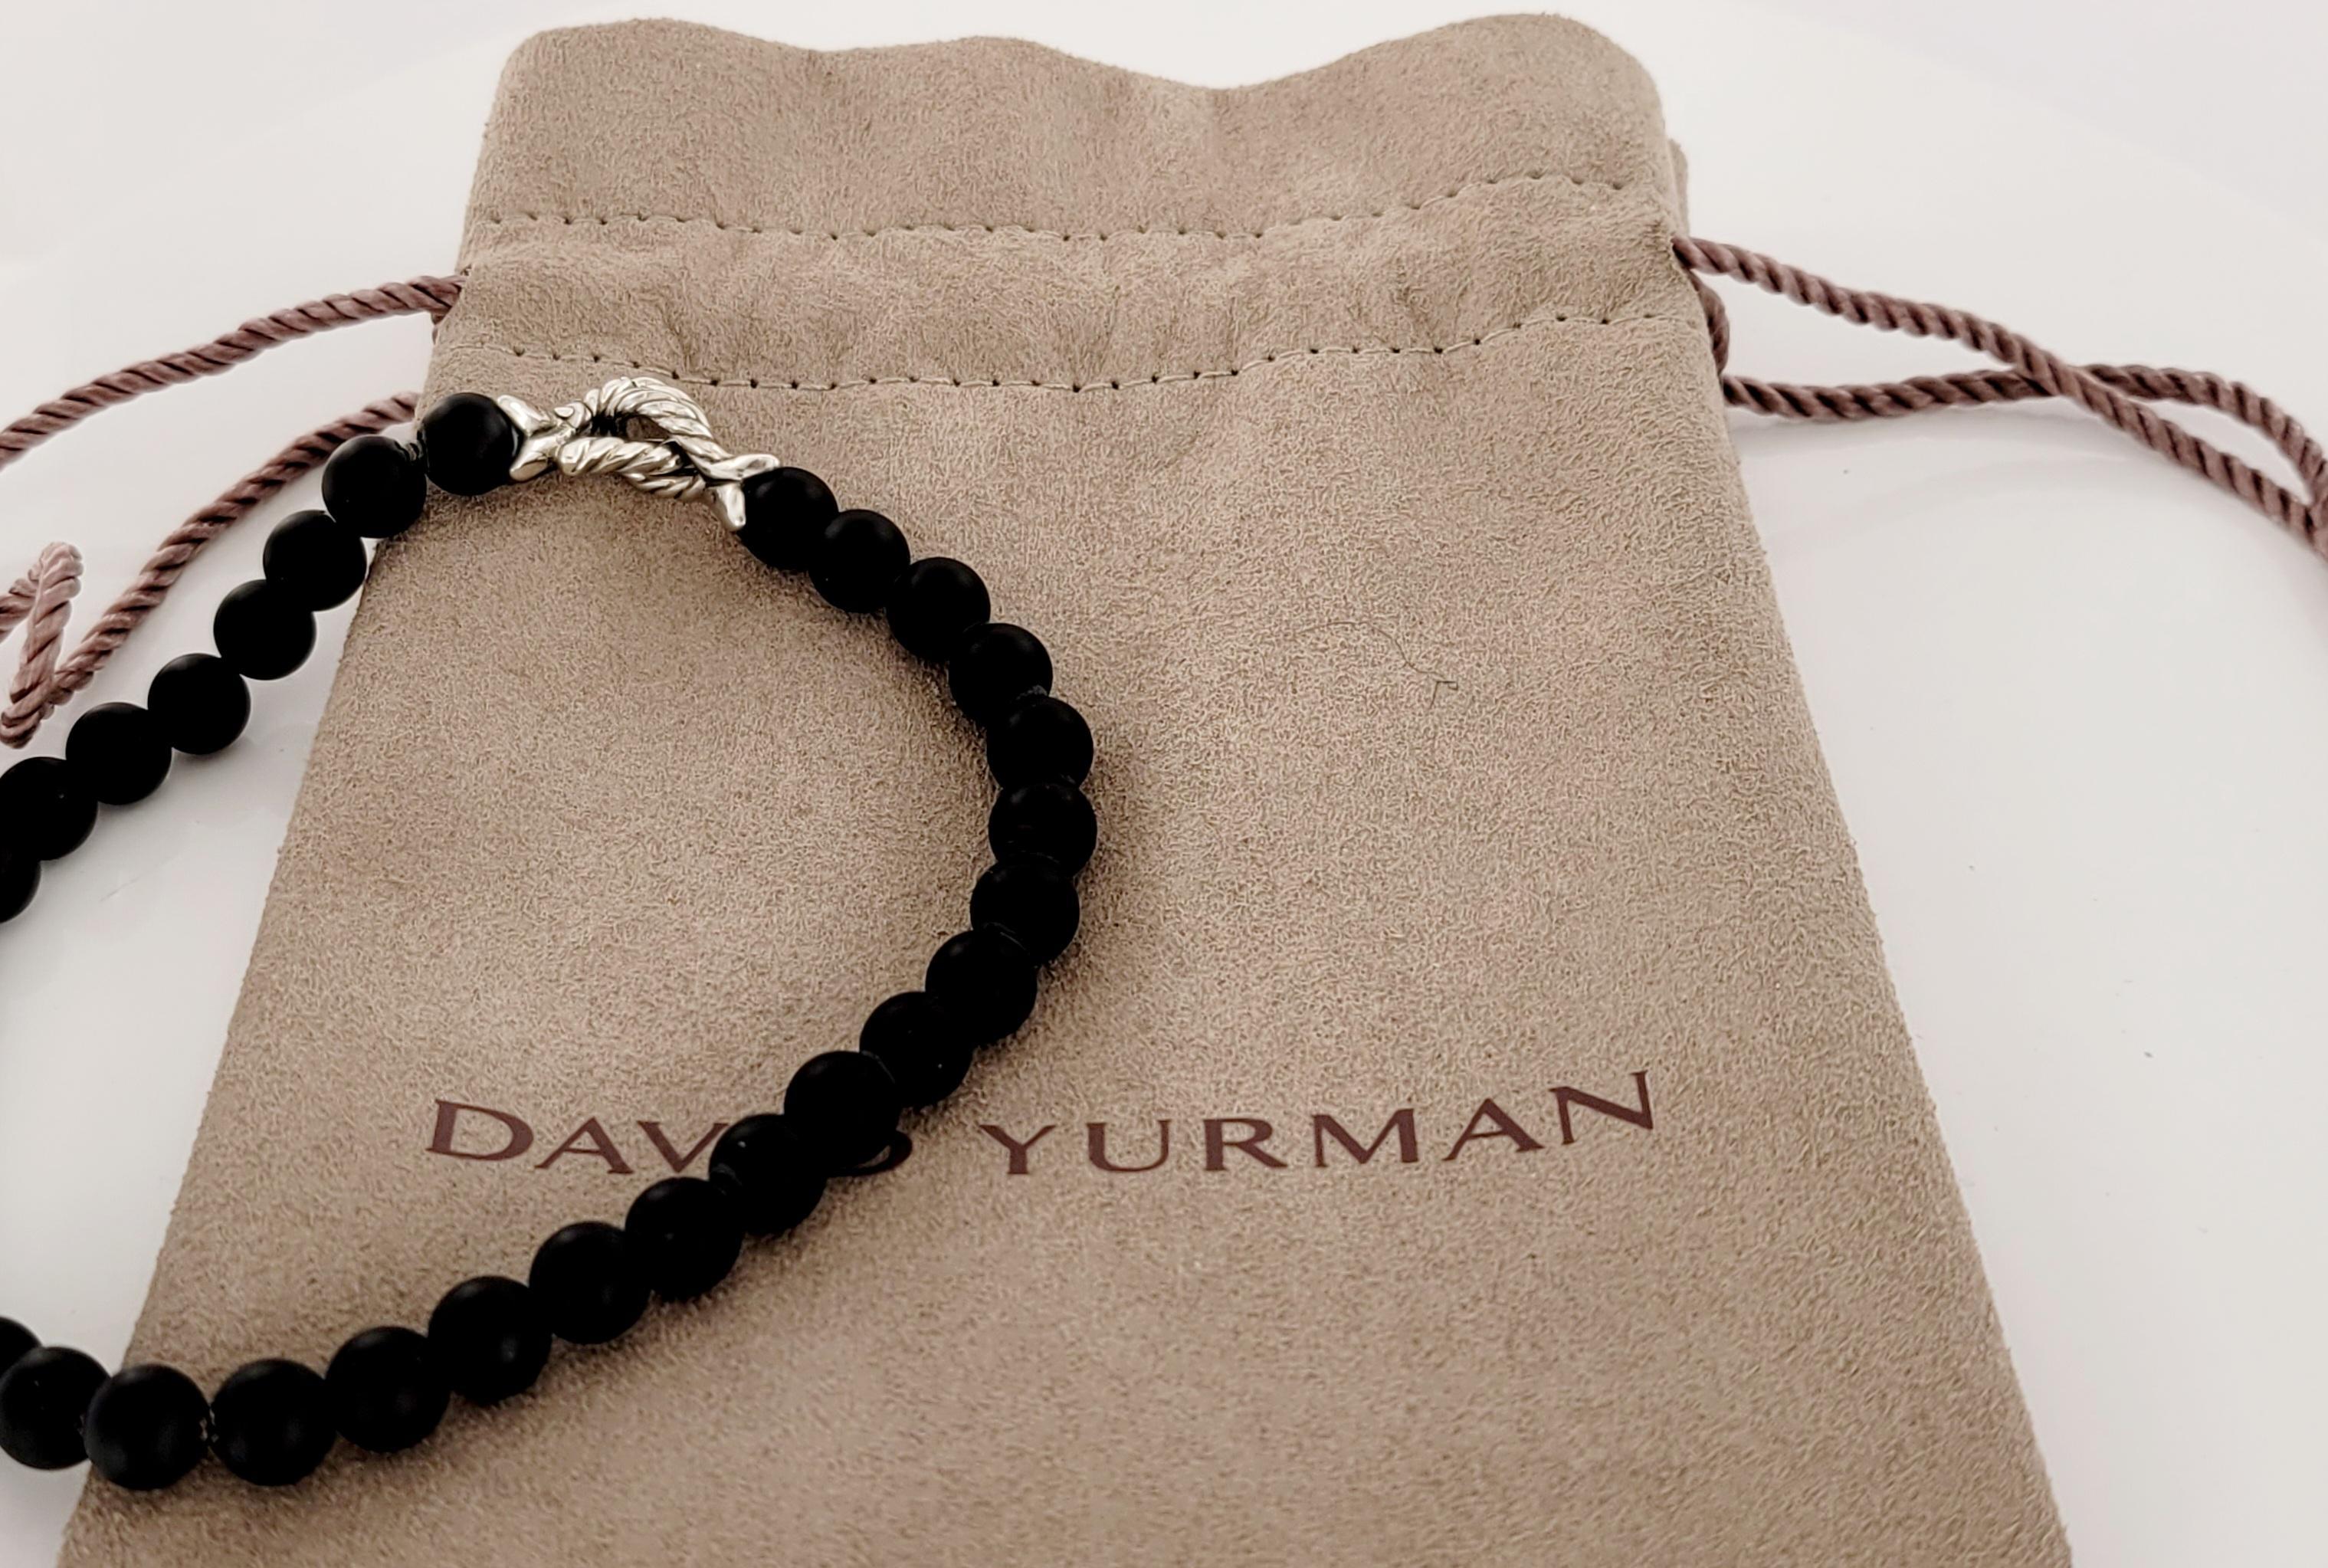 Brand David Yurman
Style Matte black beads bracelet  
Material Sterling Silver 925
Onyx  Width 6mm'
Hallmark (C)D.Y. David Yurman 925
David Yurman pouch included
Perfect gift for any occasion 
Condition Never Worn (New)